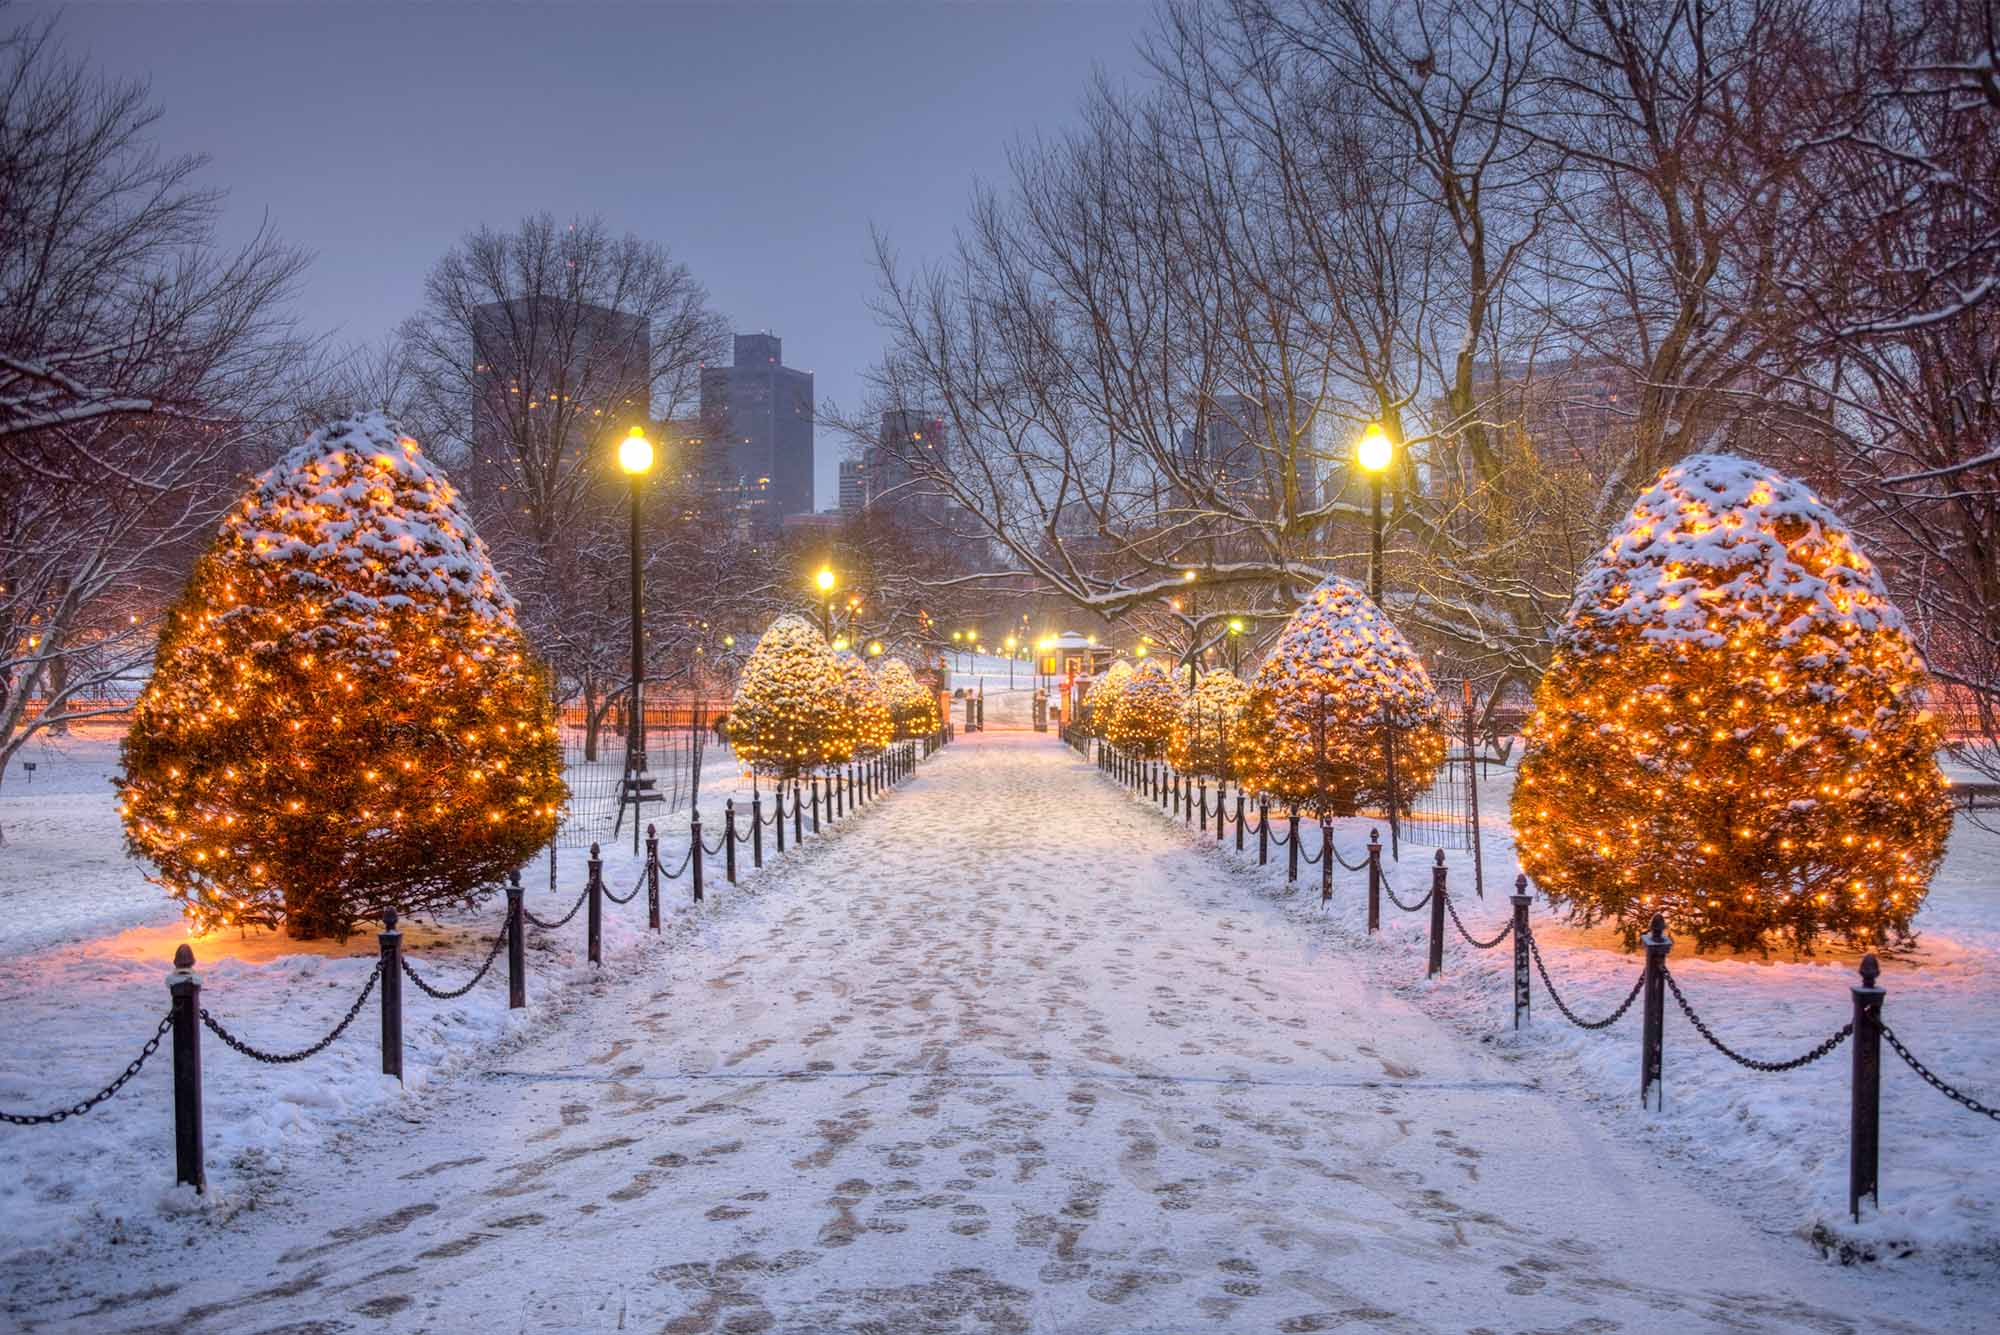 Photo: A snowy evening at Boston Common, where pine trees are covered in lights and a brick walkway is dusted with flurries